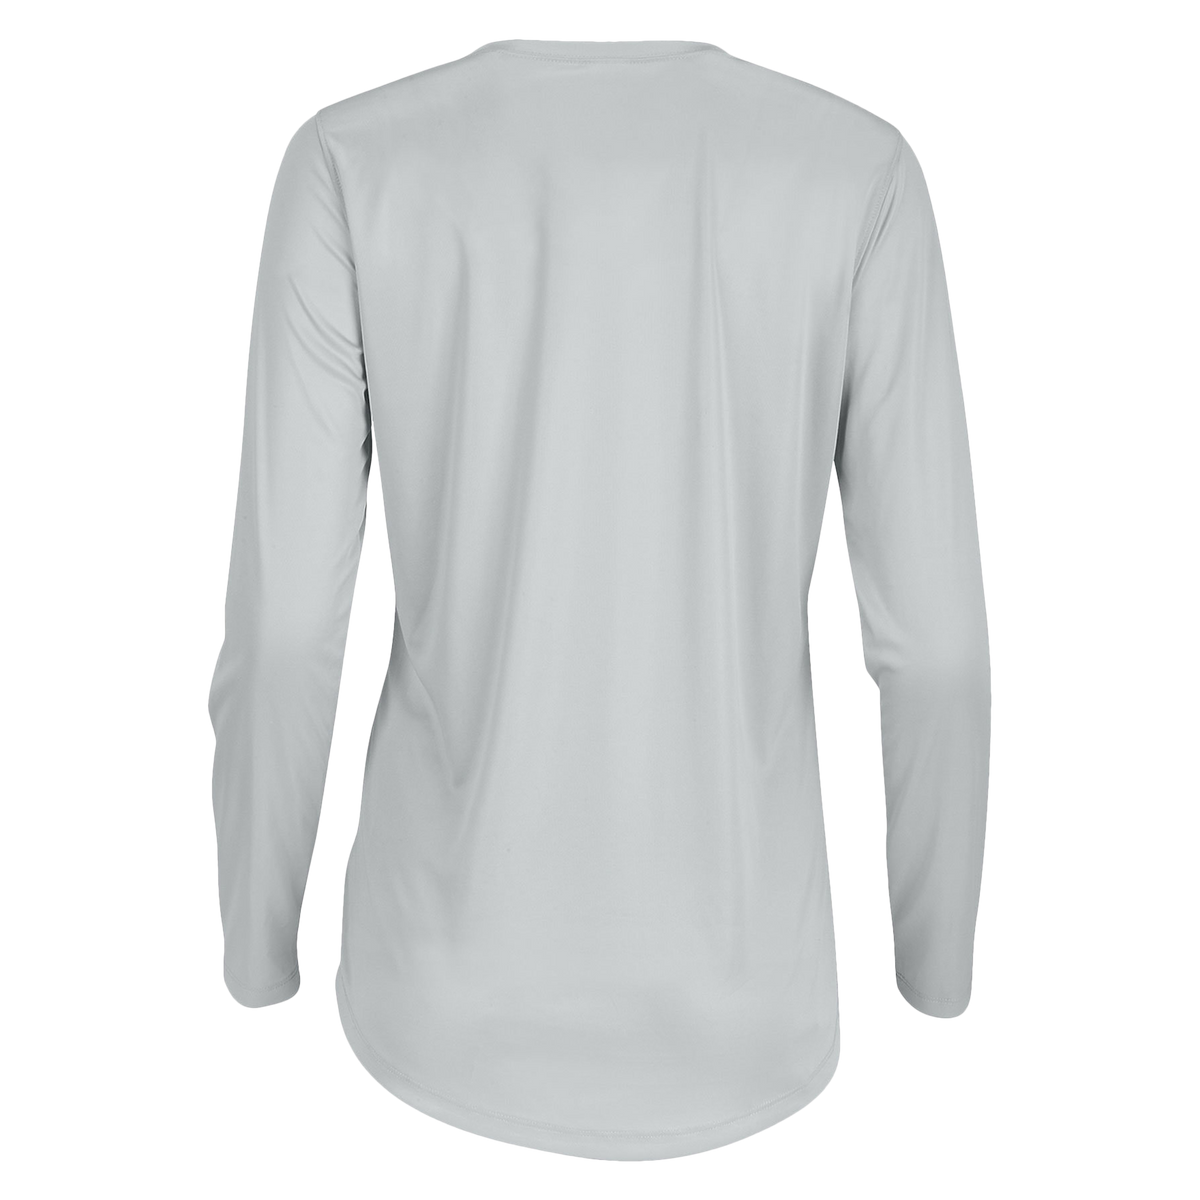 Phase Five Compass SPF Long Sleeve